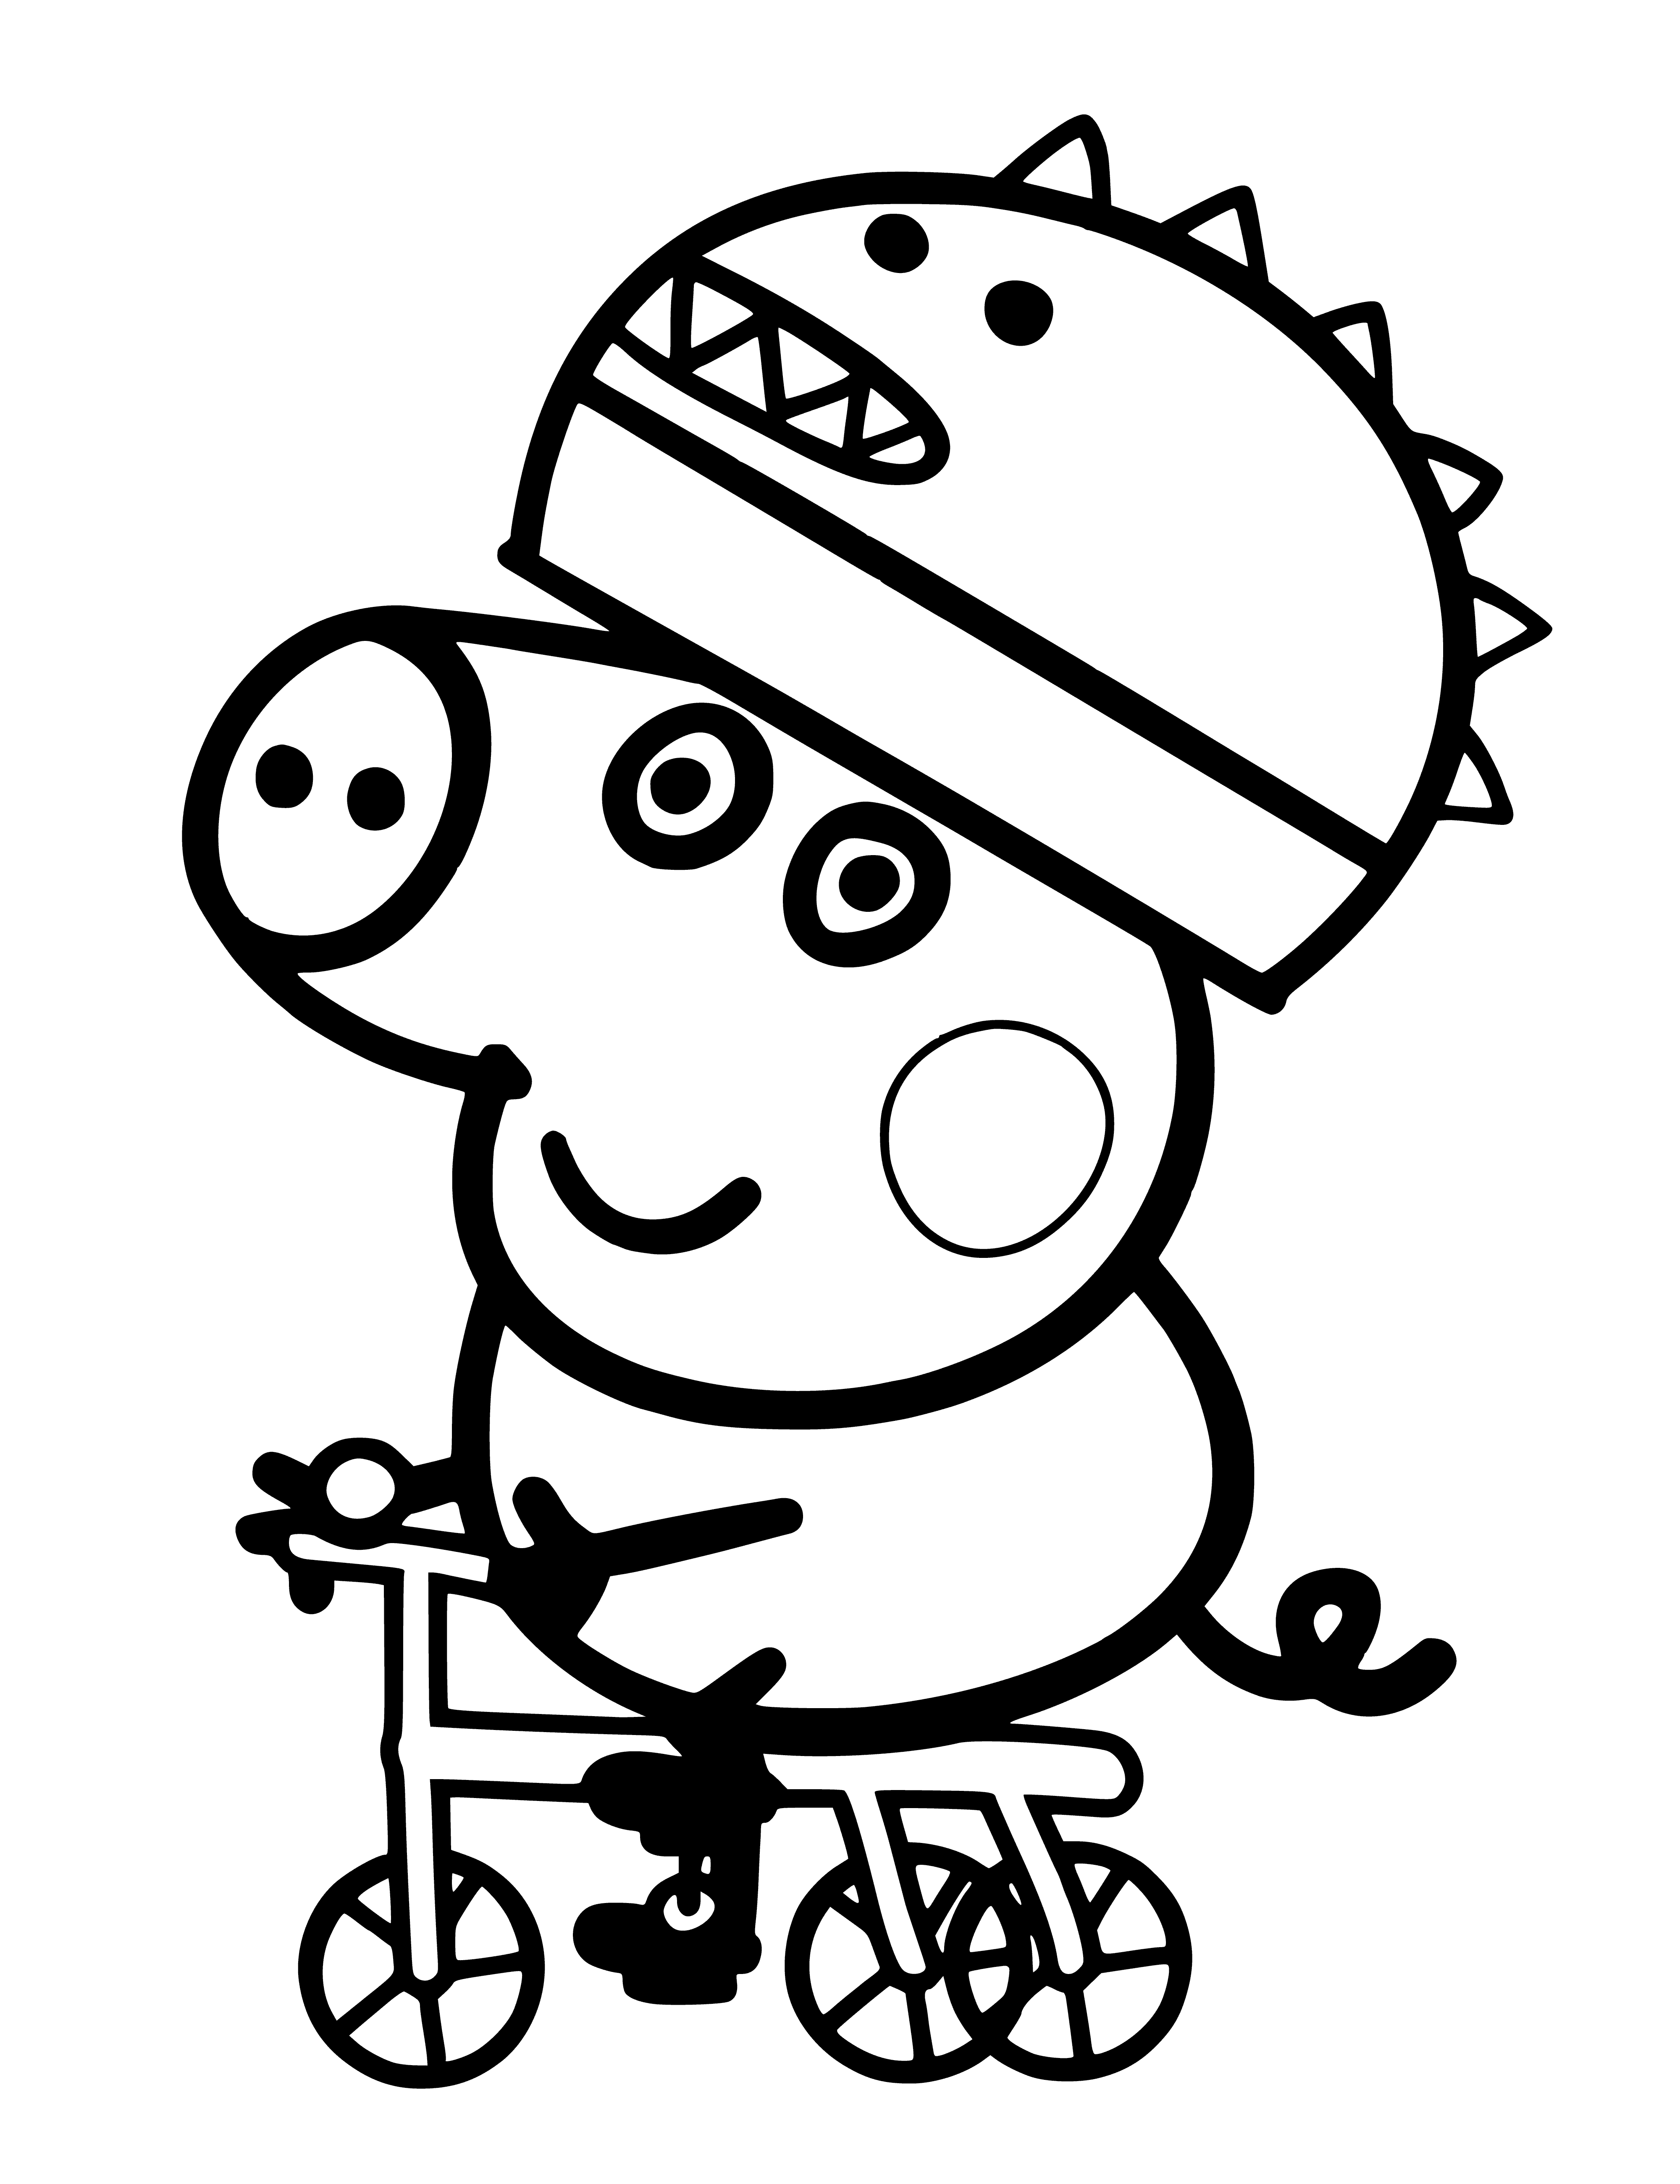 coloring page: George cycles through the park with a helmet, big smile. #biking #summer